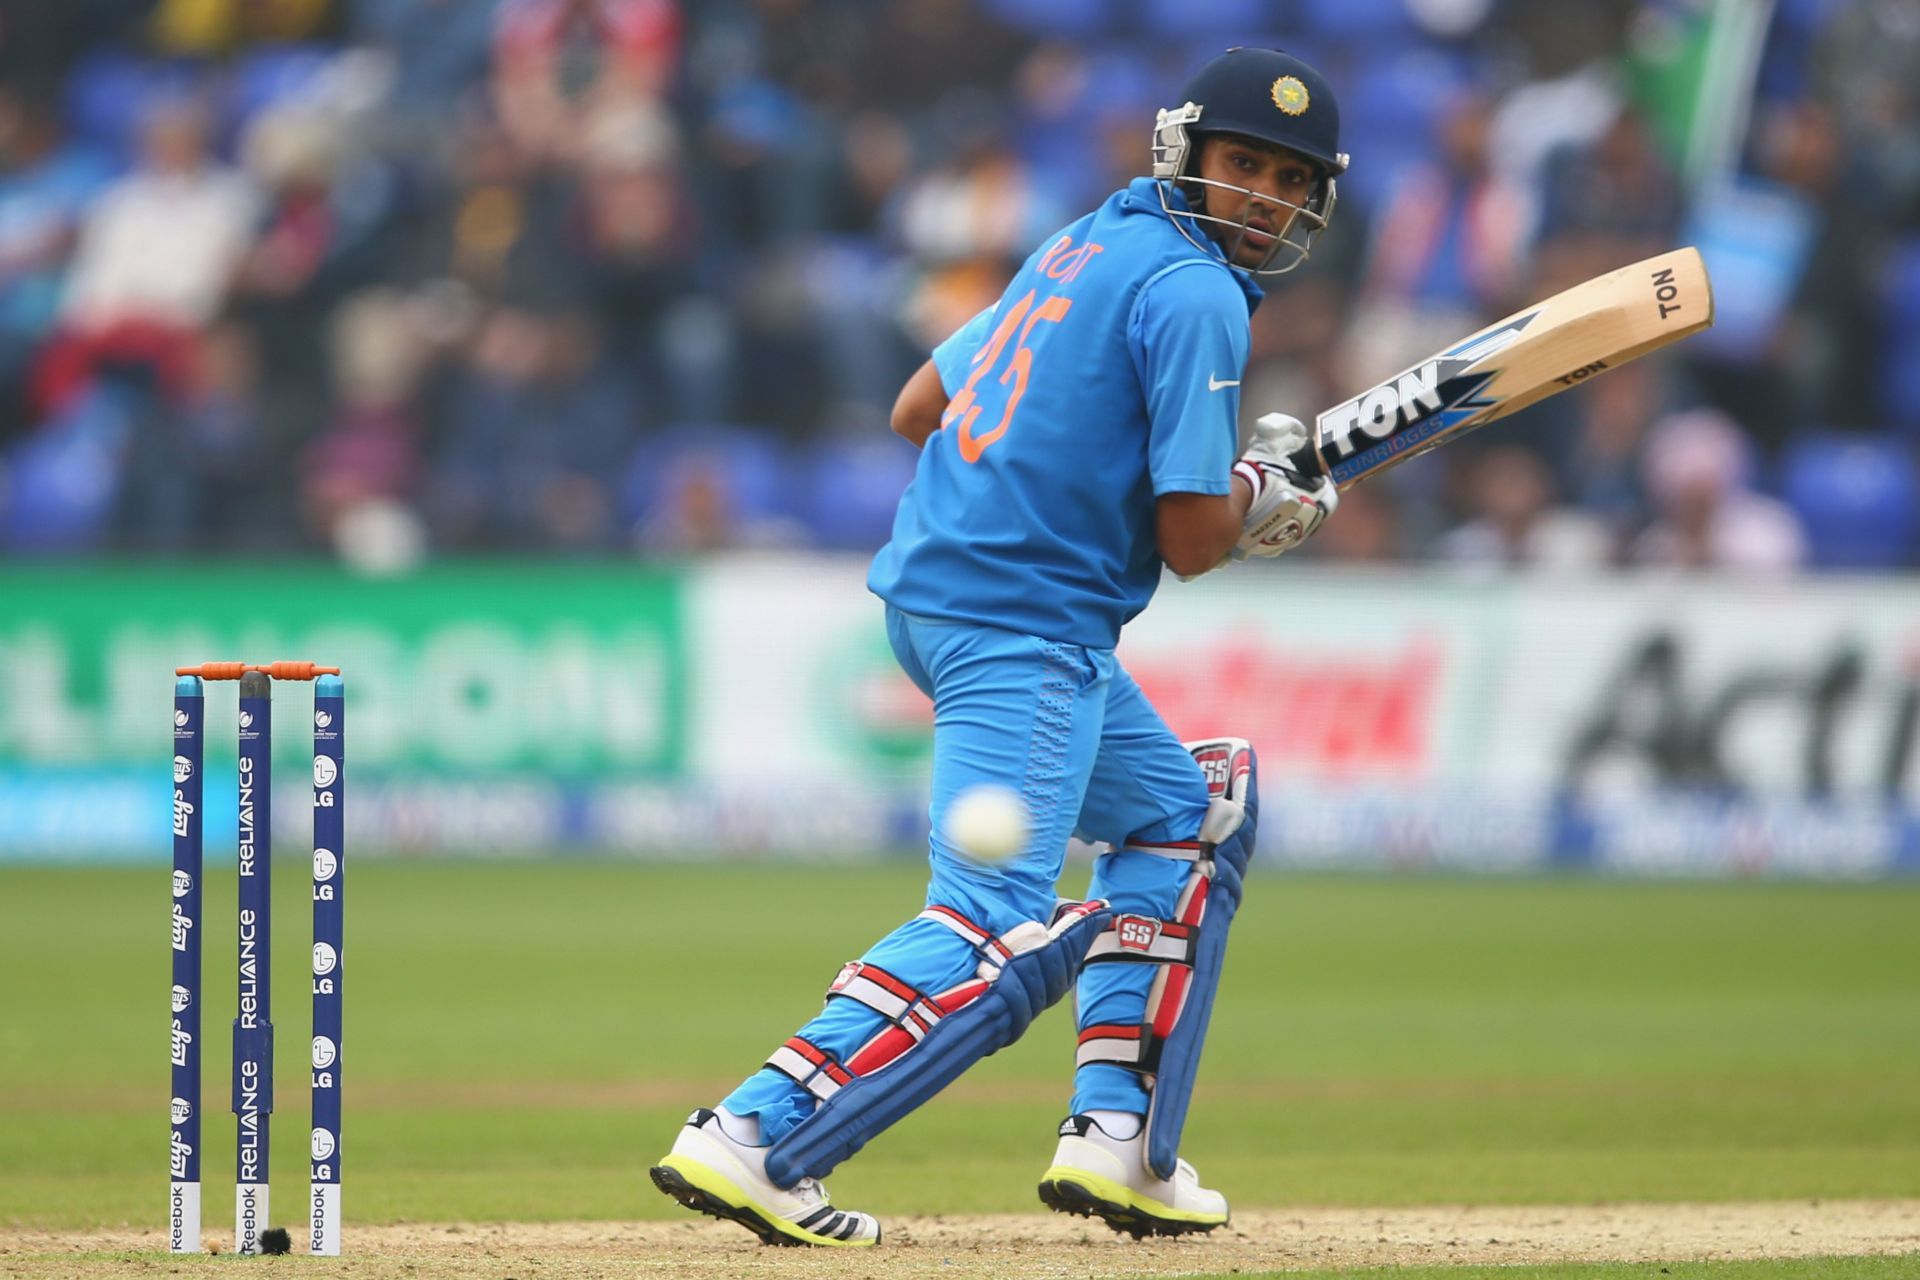 Rohit Sharma hit 16 sixes in a match against Australia in 2013 (Image: Getty)